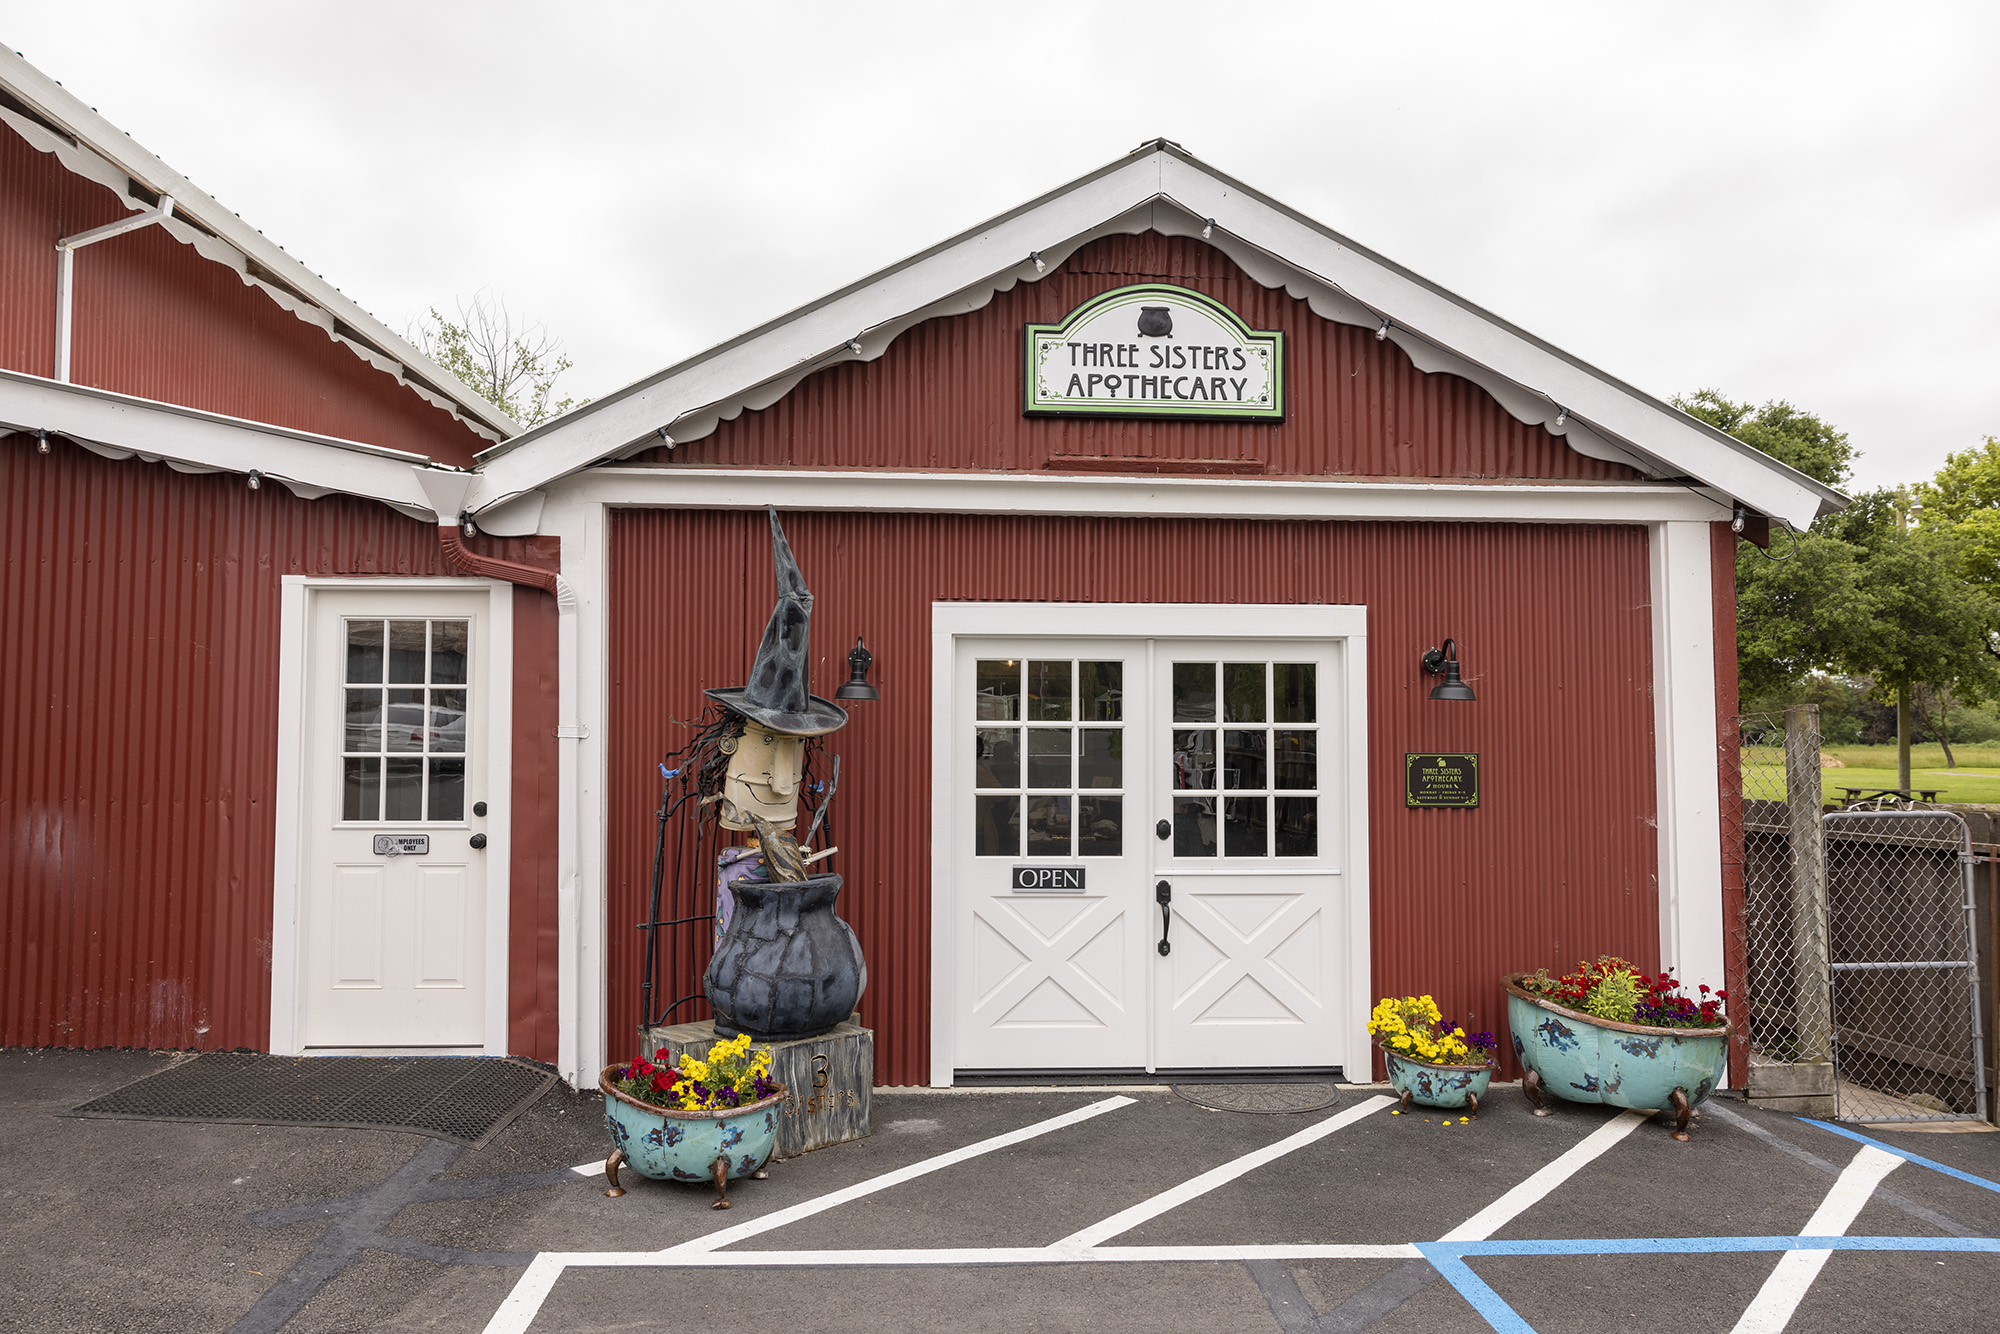 Three Sisters Apothecary exterior with sculpture of witch brewing over cauldron and bath tub shaped flowers pots with yellow, red, and purple flowers.